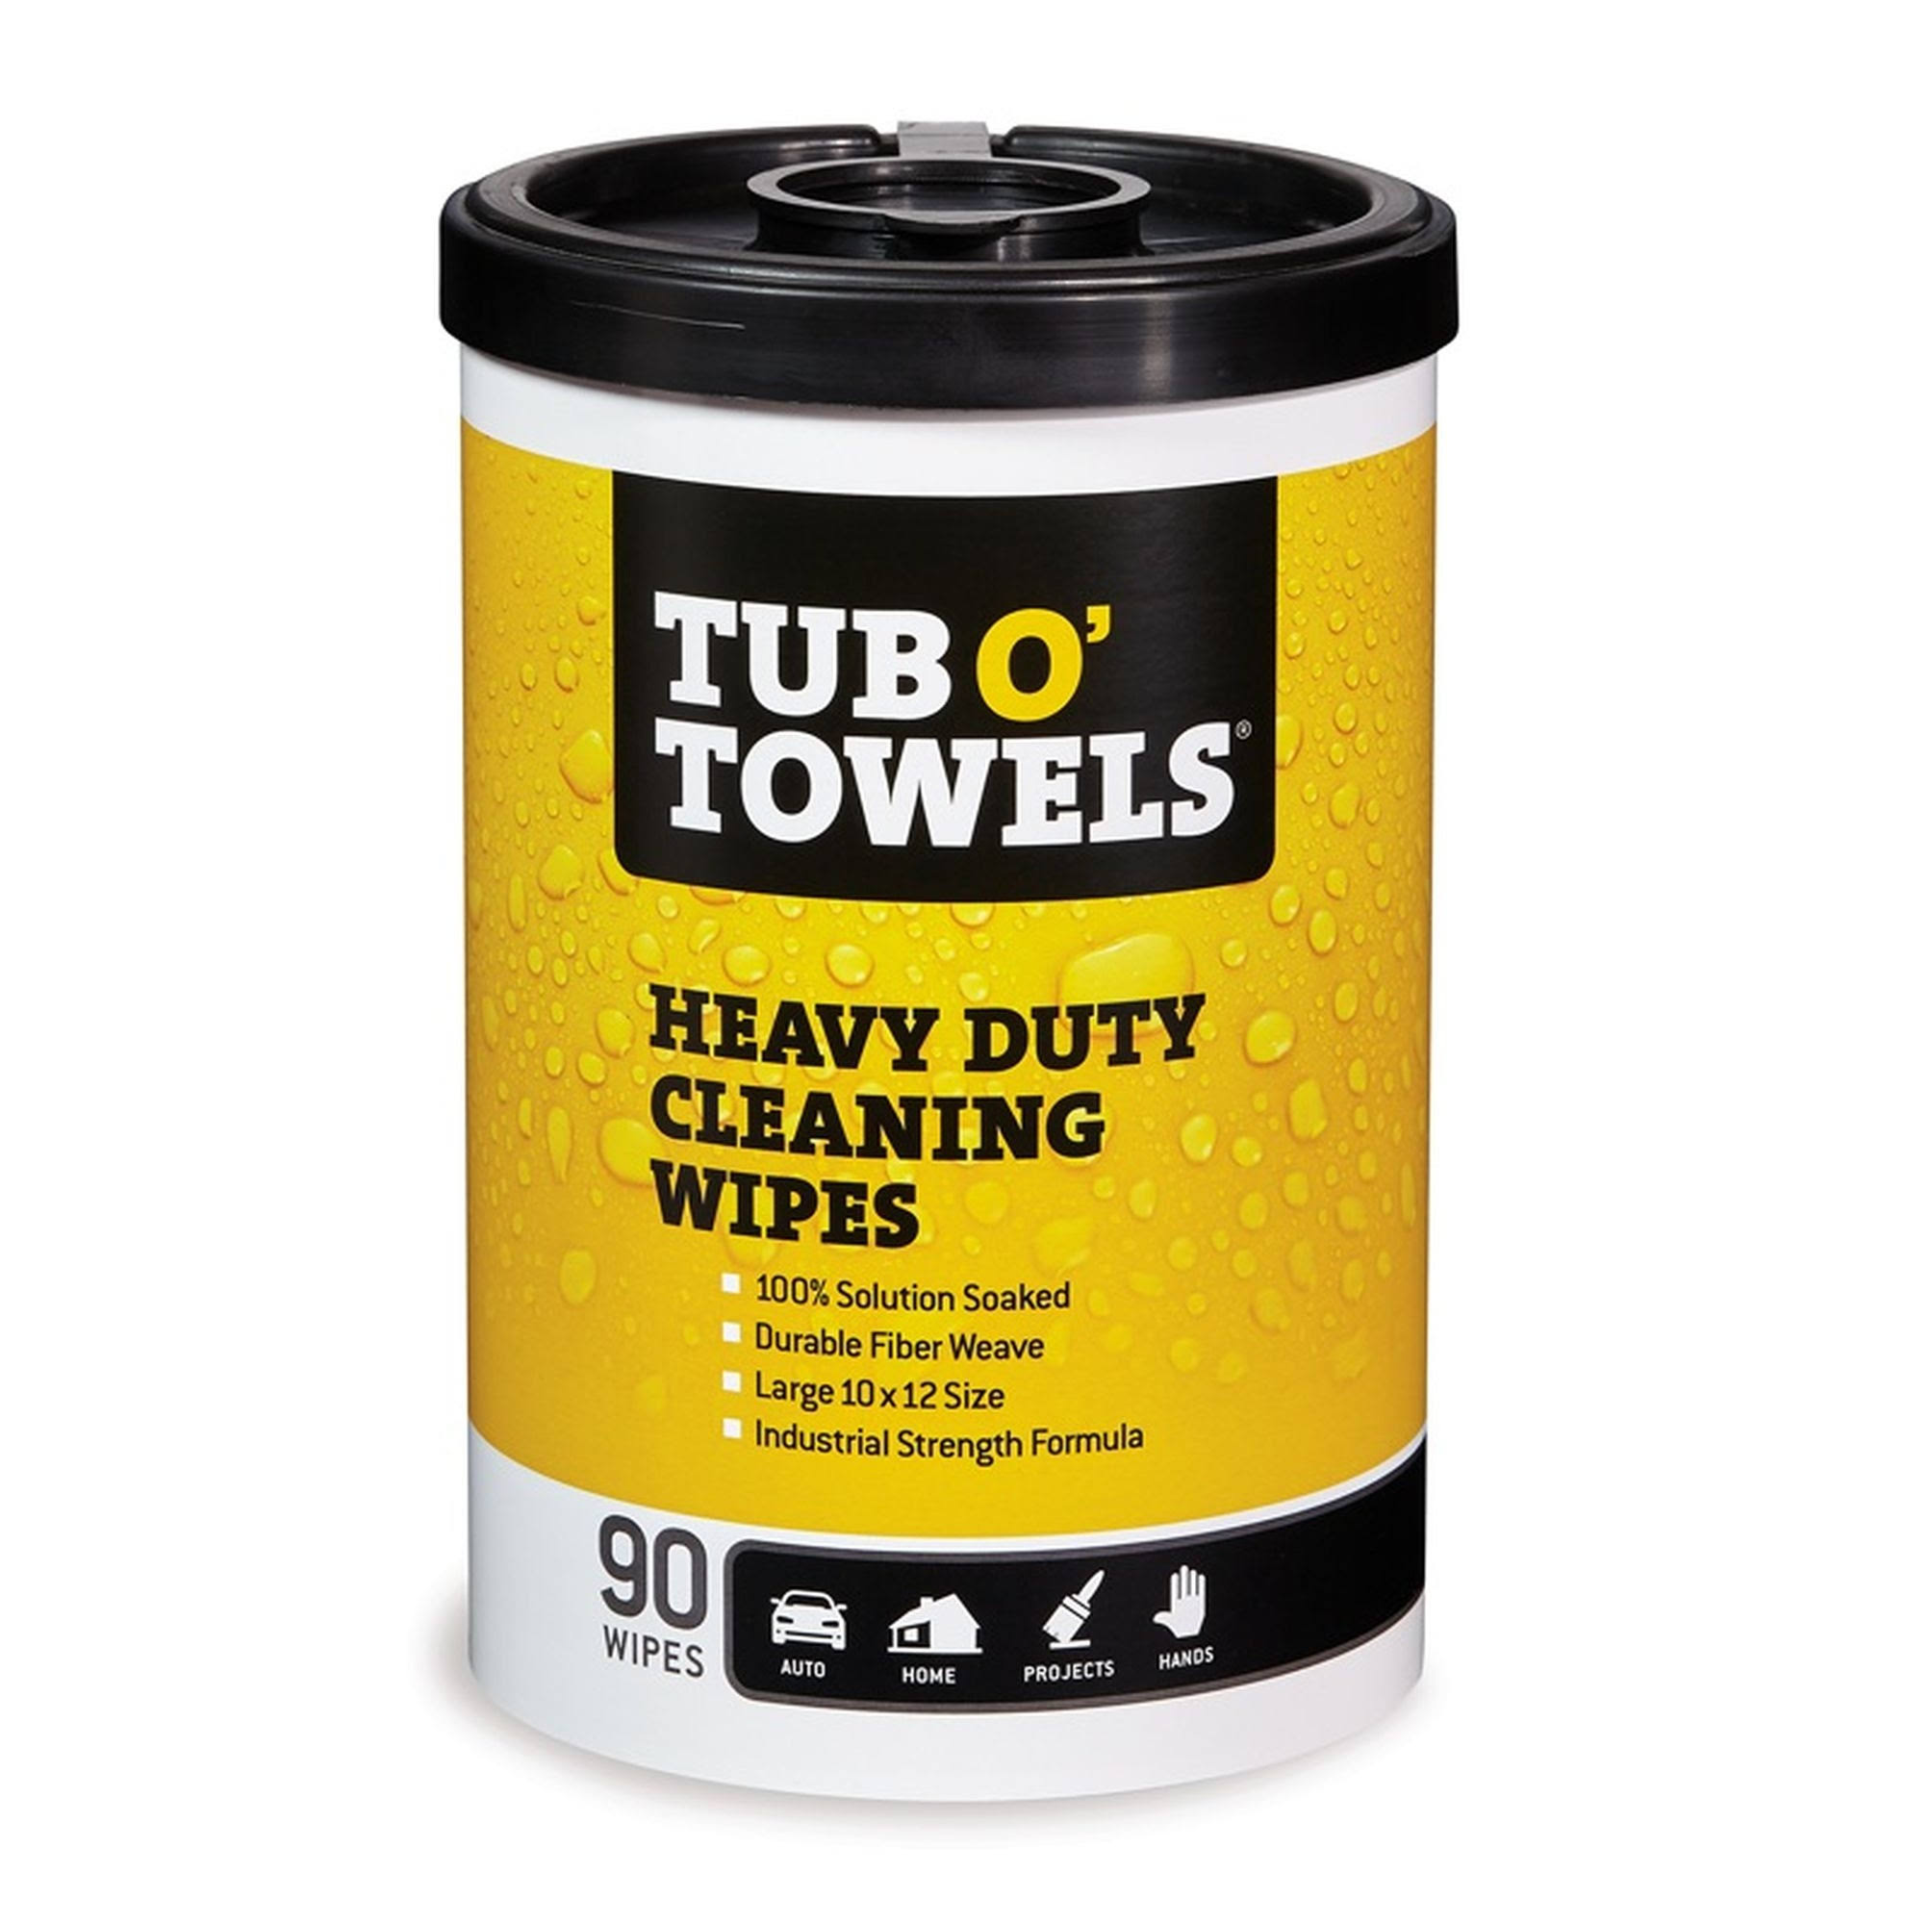 Tub O Towels Heavy-Duty Multi-Surface Cleaning Wipes - 90 Count, 10" x 12"